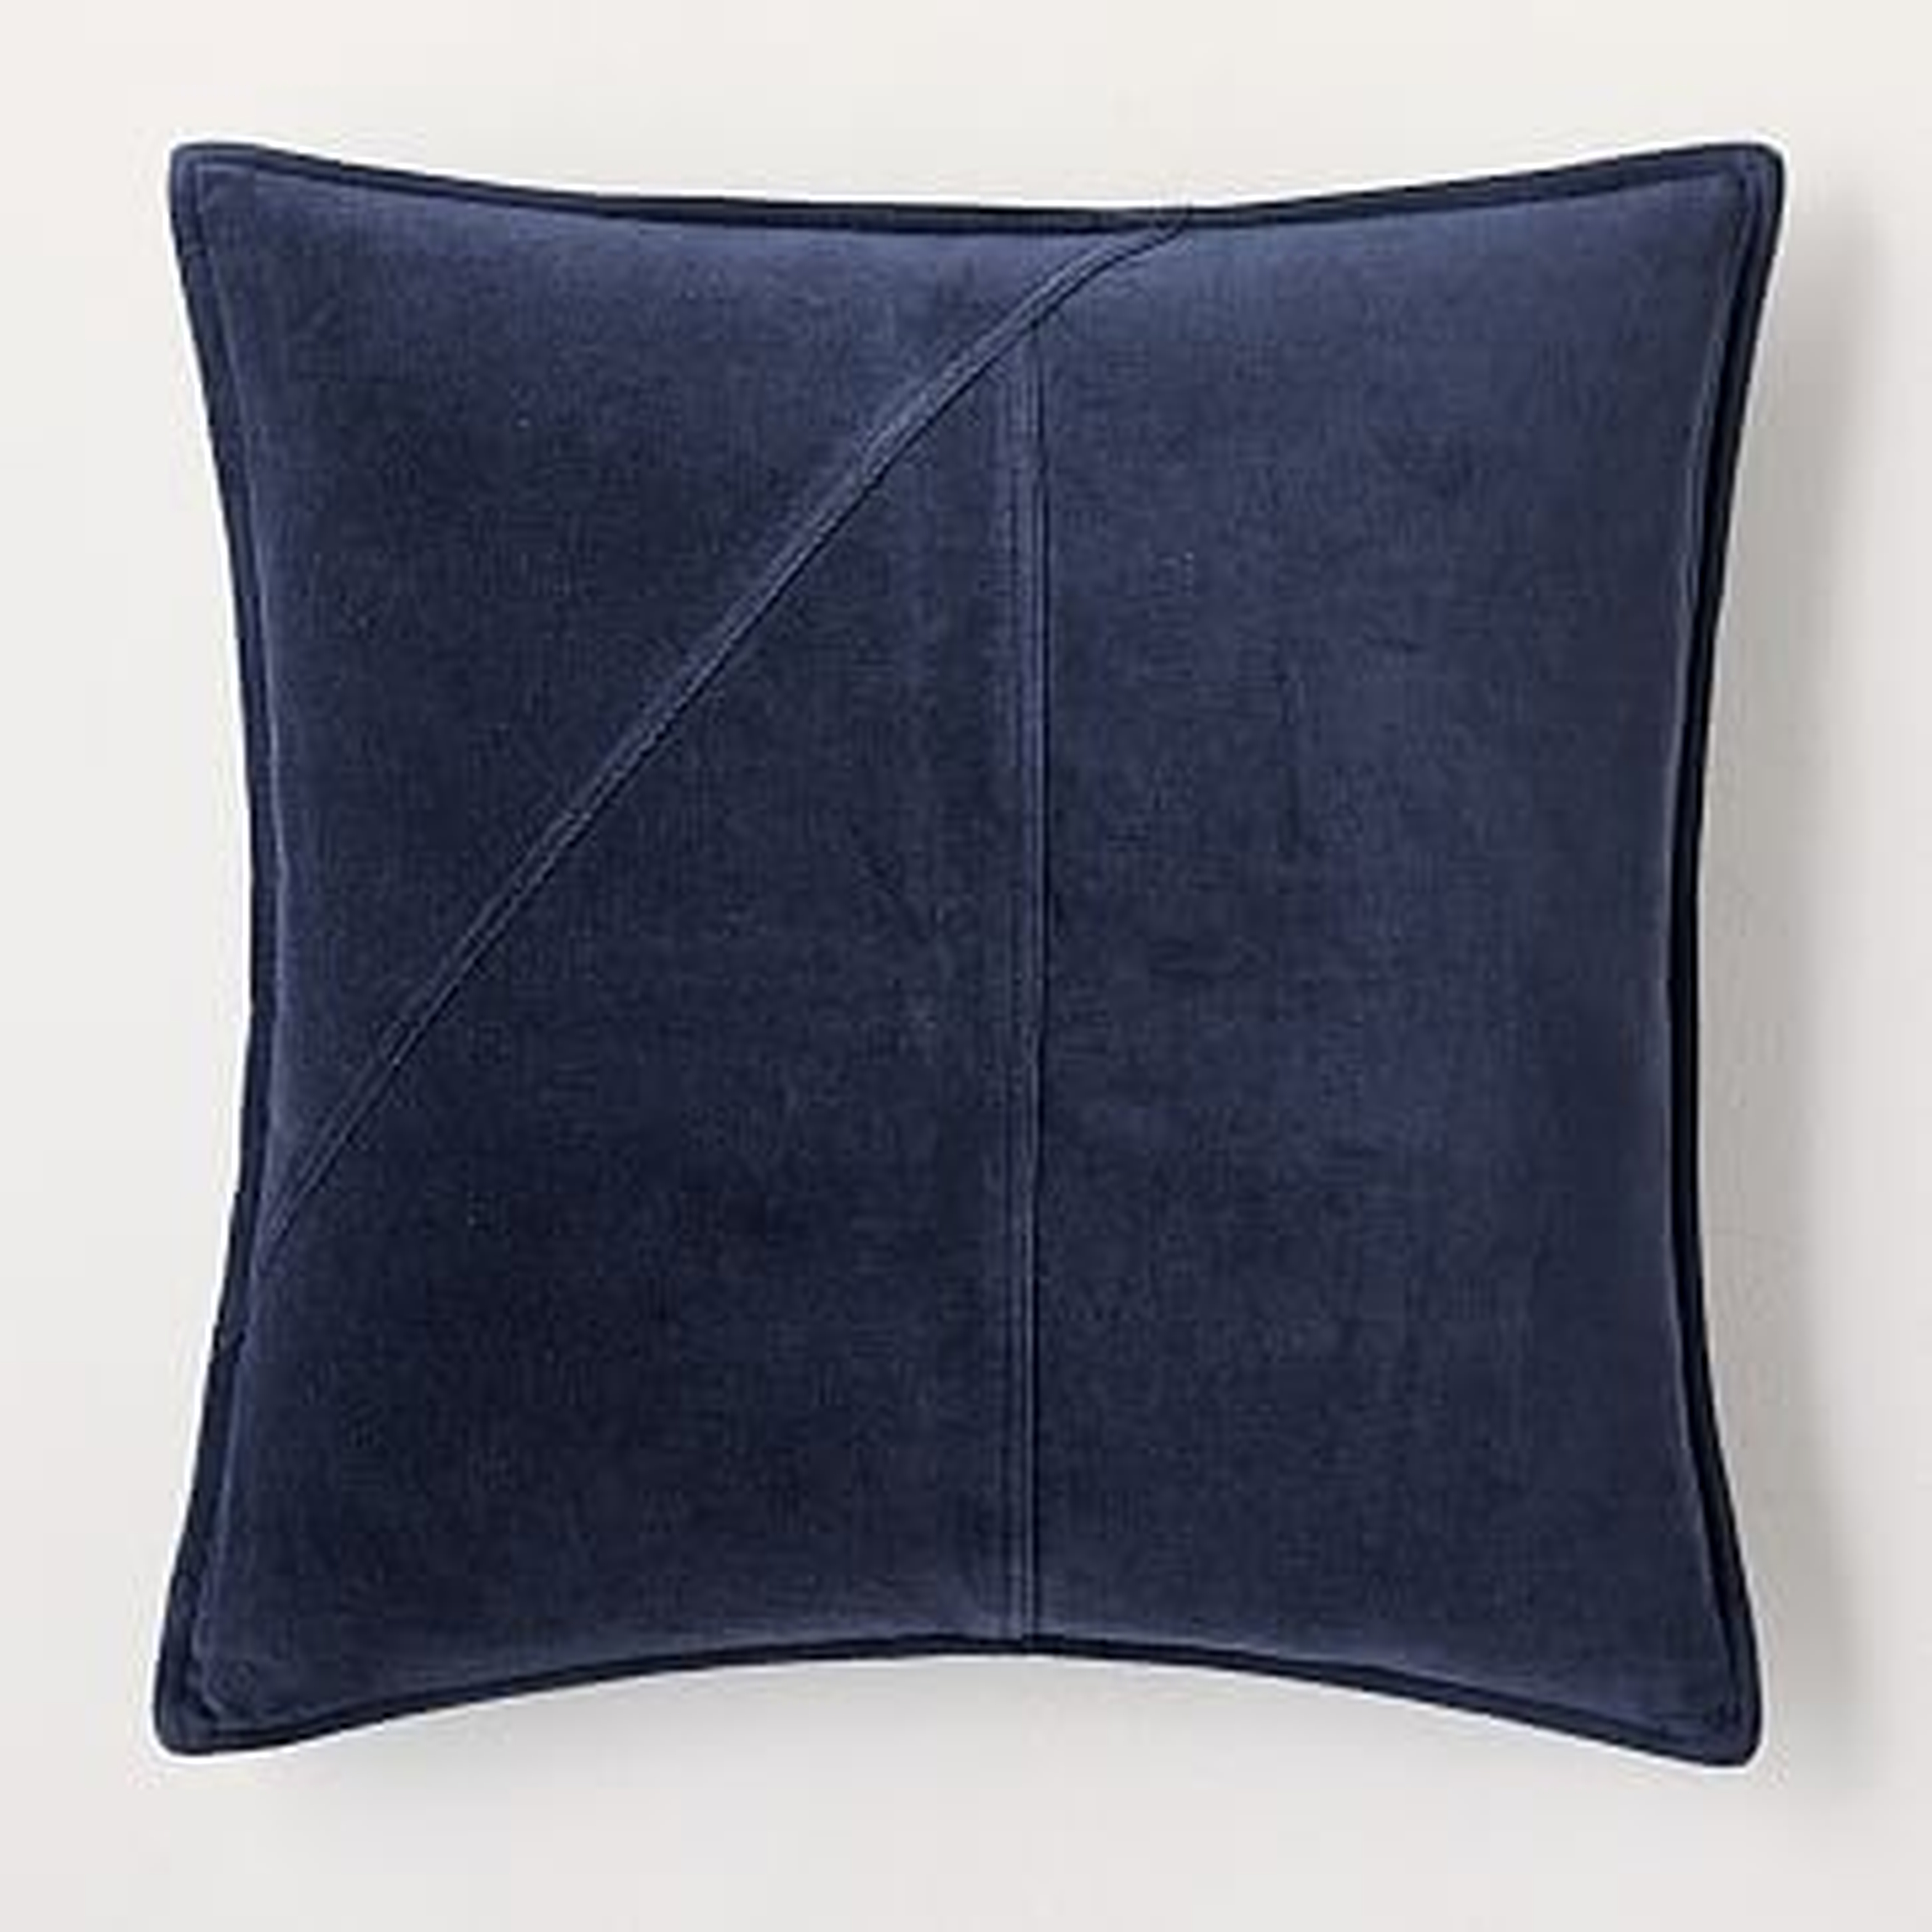 Washed Cotton Velvet Pillow Cover, 18"x18", Midnight, Set of 2 - West Elm